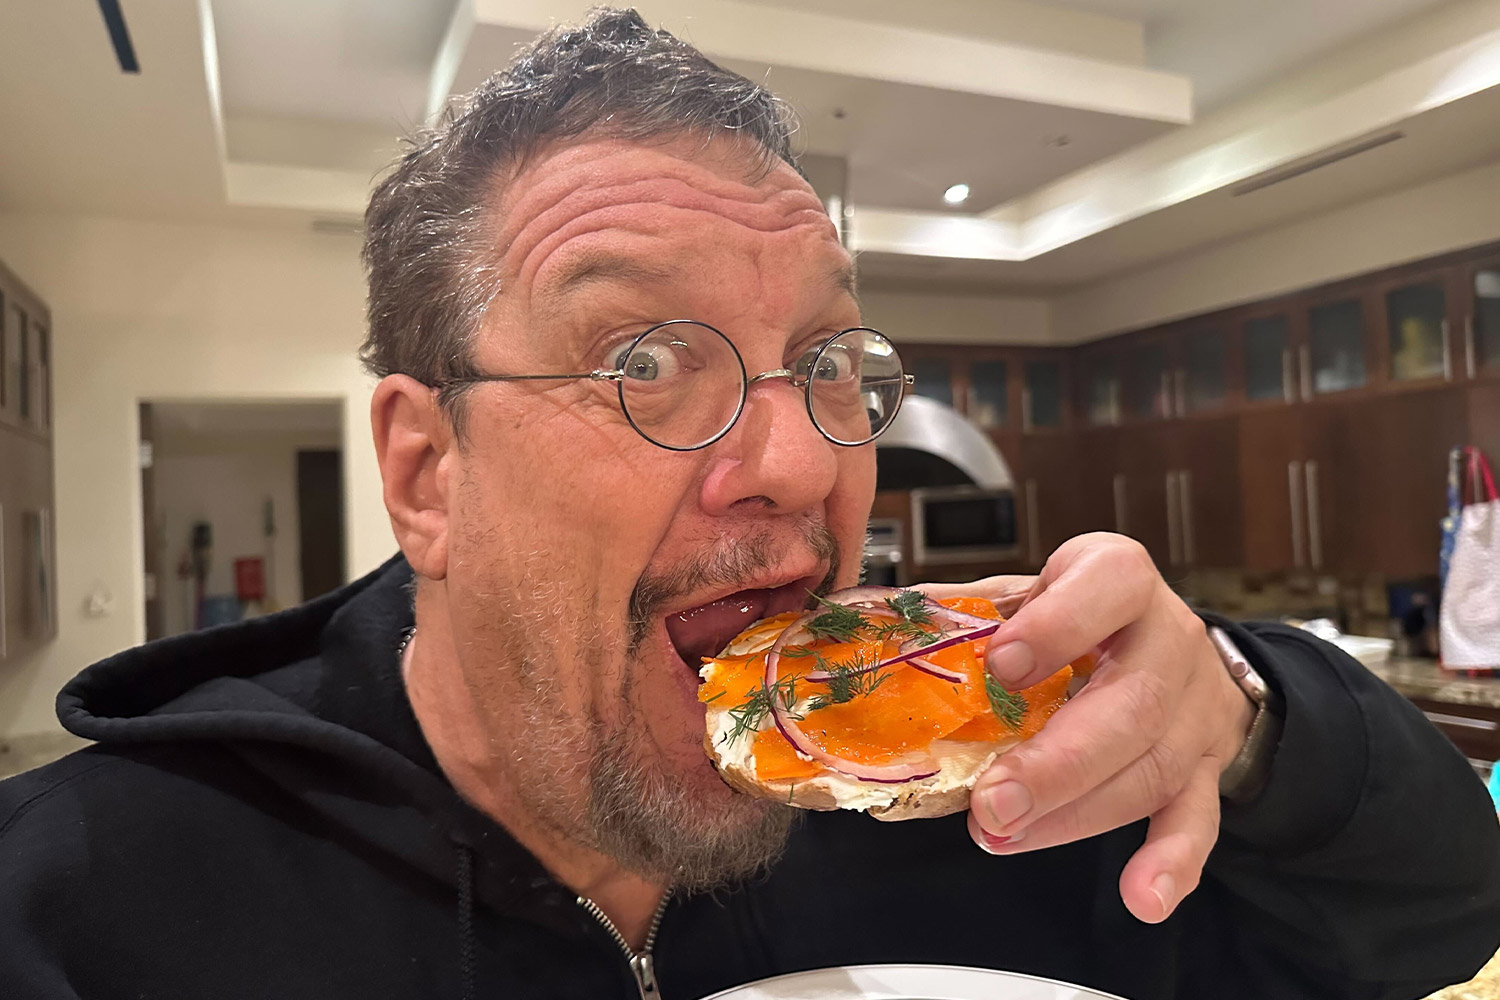 Man in glasses eating a bagel looking excited